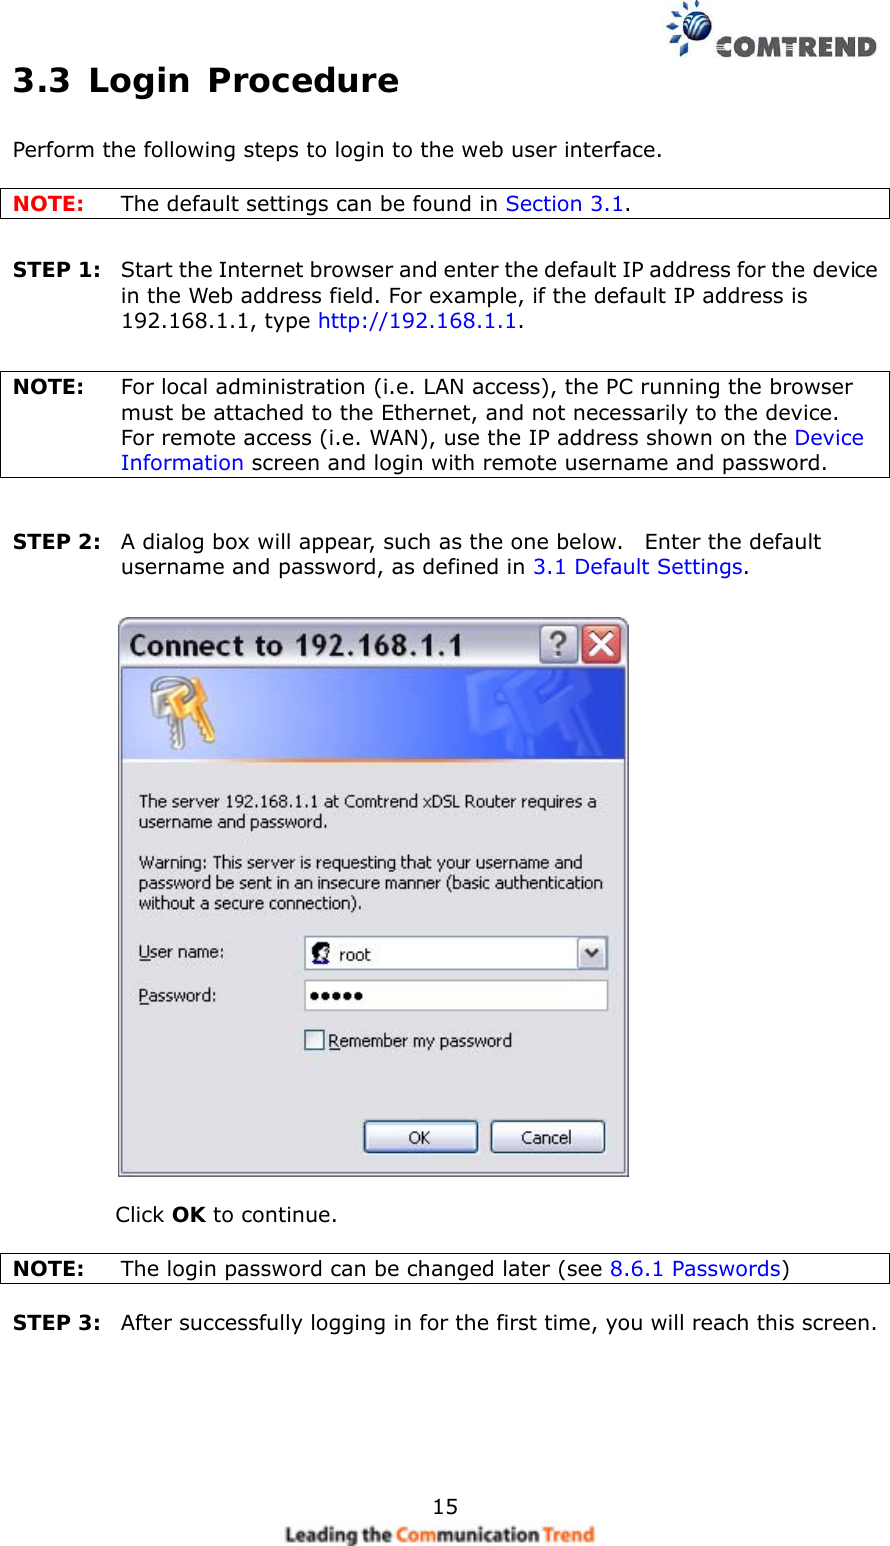    153.3 Login Procedure Perform the following steps to login to the web user interface.      NOTE:  The default settings can be found in Section 3.1.     STEP 1:  Start the Internet browser and enter the default IP address for the device in the Web address field. For example, if the default IP address is 192.168.1.1, type http://192.168.1.1.  NOTE:  For local administration (i.e. LAN access), the PC running the browser must be attached to the Ethernet, and not necessarily to the device.     For remote access (i.e. WAN), use the IP address shown on the Device Information screen and login with remote username and password.  STEP 2:  A dialog box will appear, such as the one below.    Enter the default username and password, as defined in 3.1 Default Settings.      Click OK to continue.  NOTE:    The login password can be changed later (see 8.6.1 Passwords)  STEP 3:  After successfully logging in for the first time, you will reach this screen.      